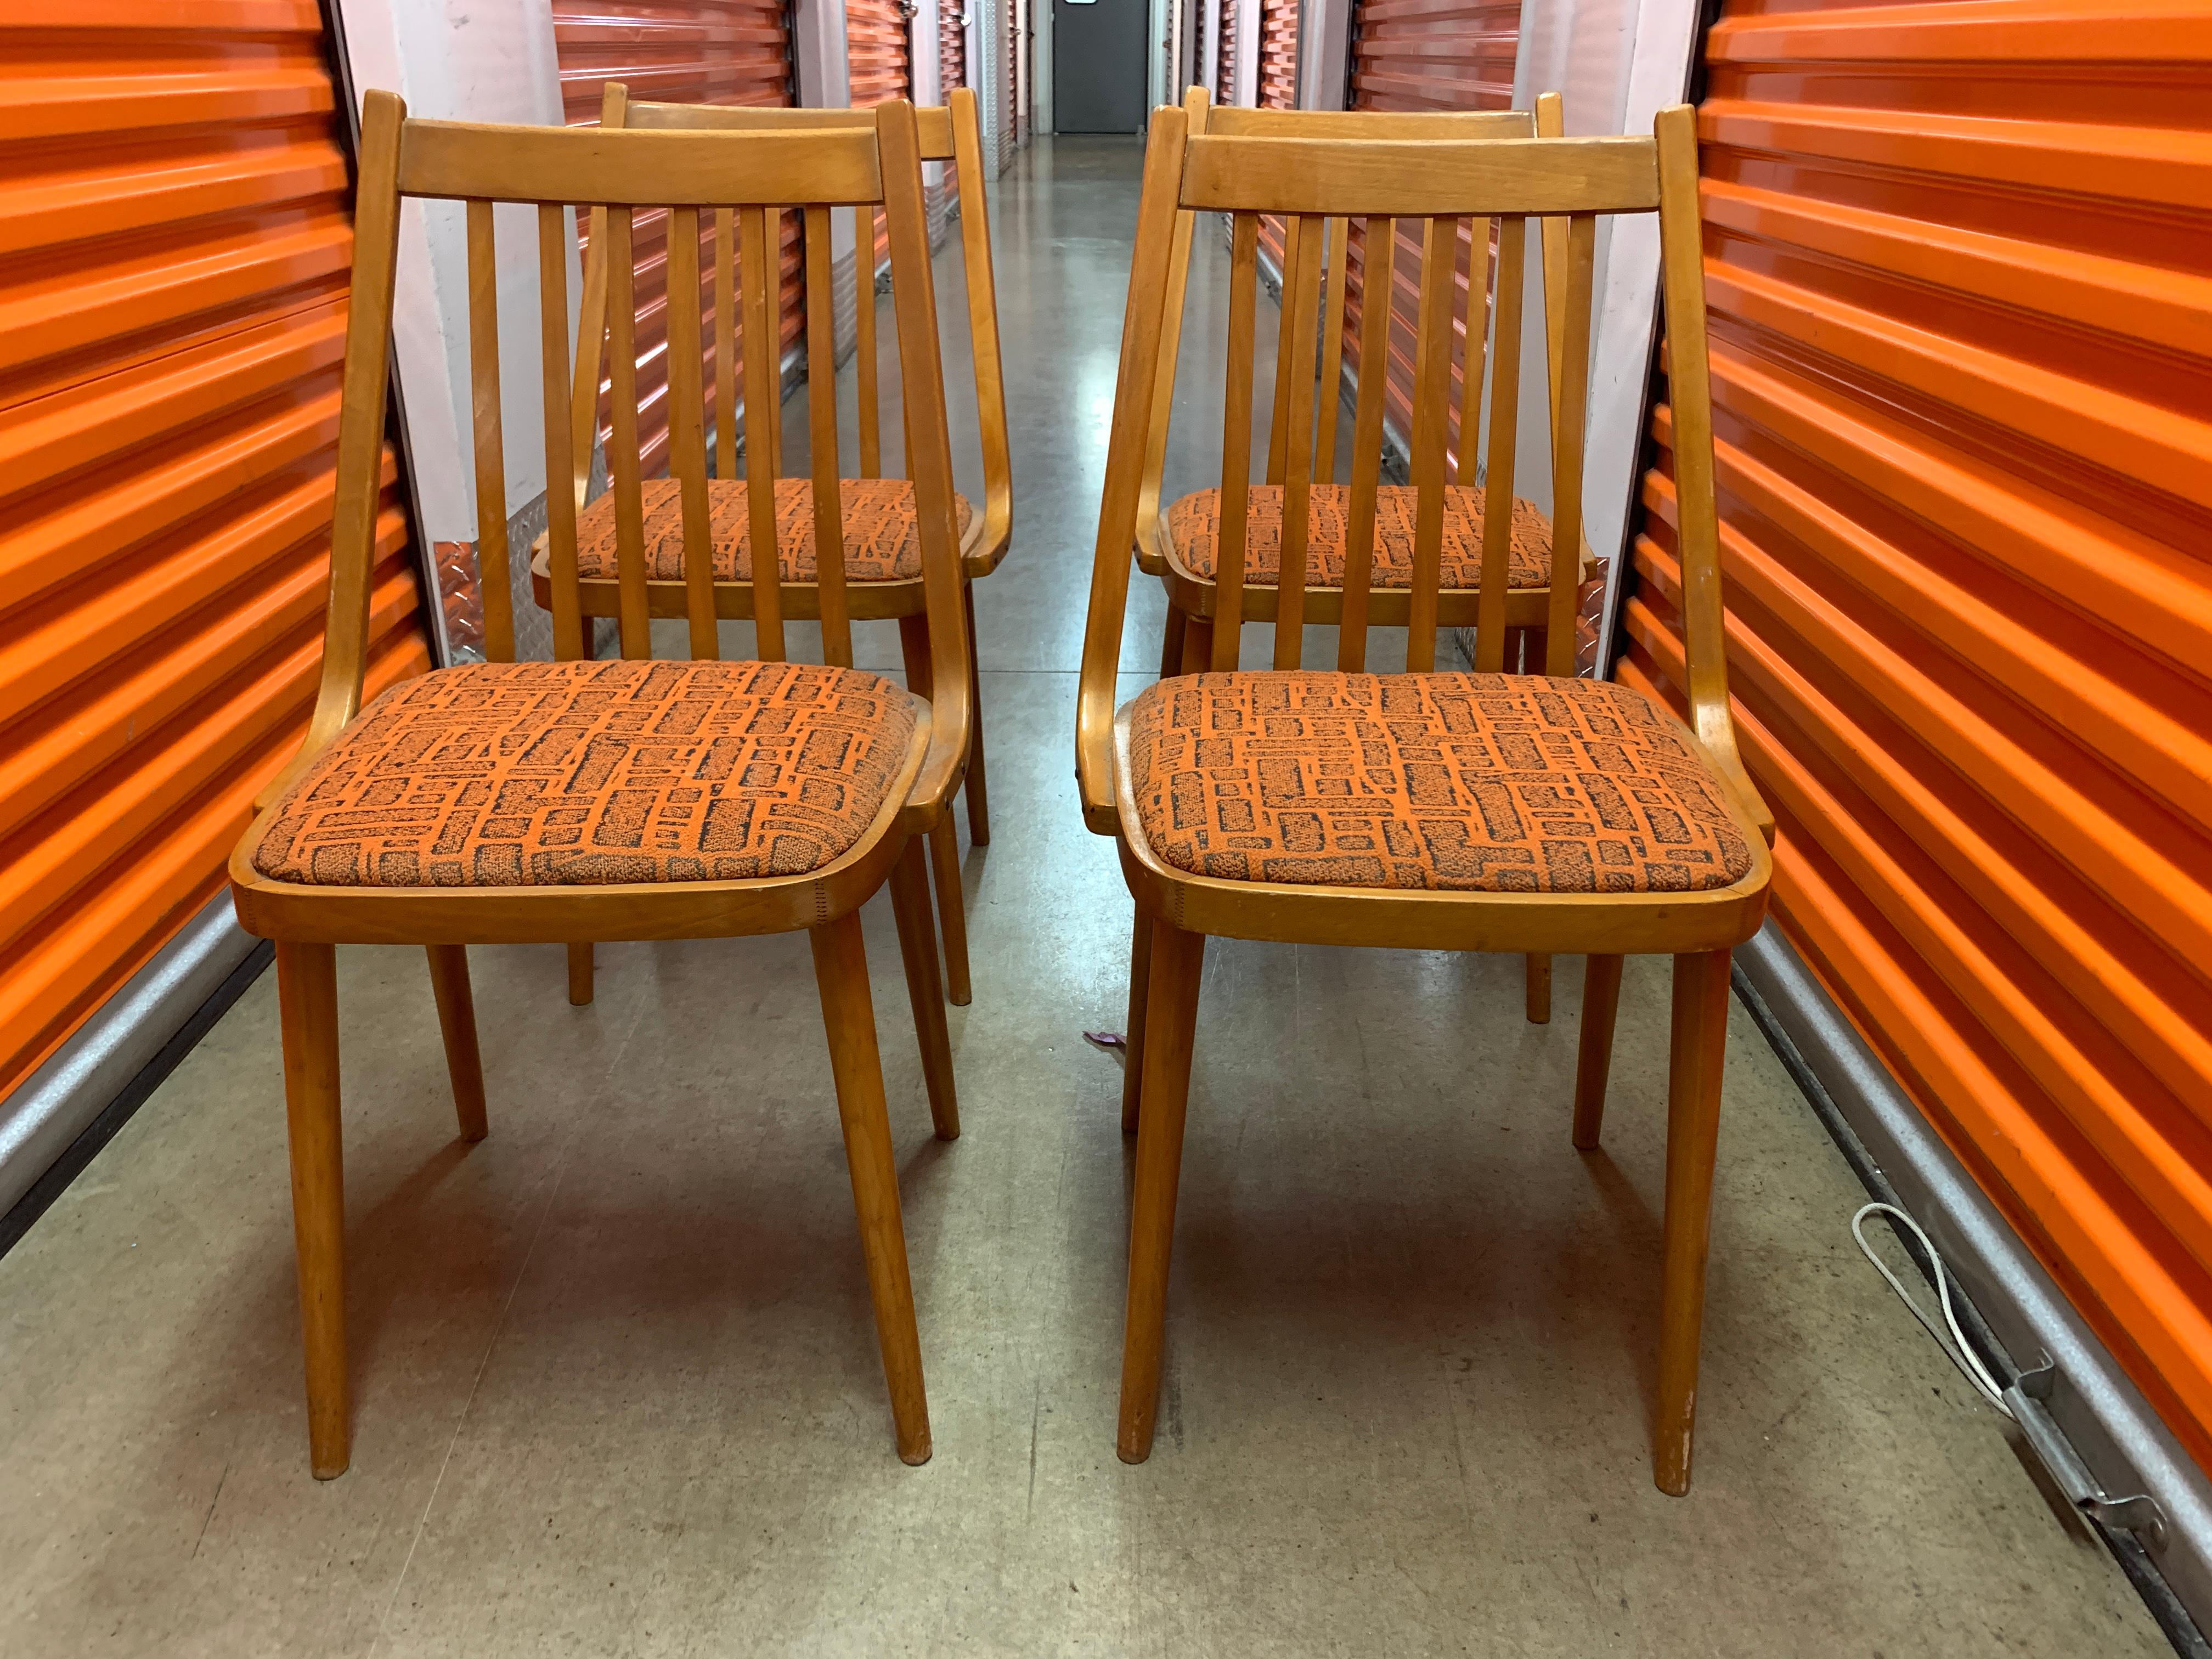 A charming set of teak midcentury Danish dining chairs with an orange and black patterned upholstery would be the perfect addition to a home that embraces the Art Deco aesthetic.